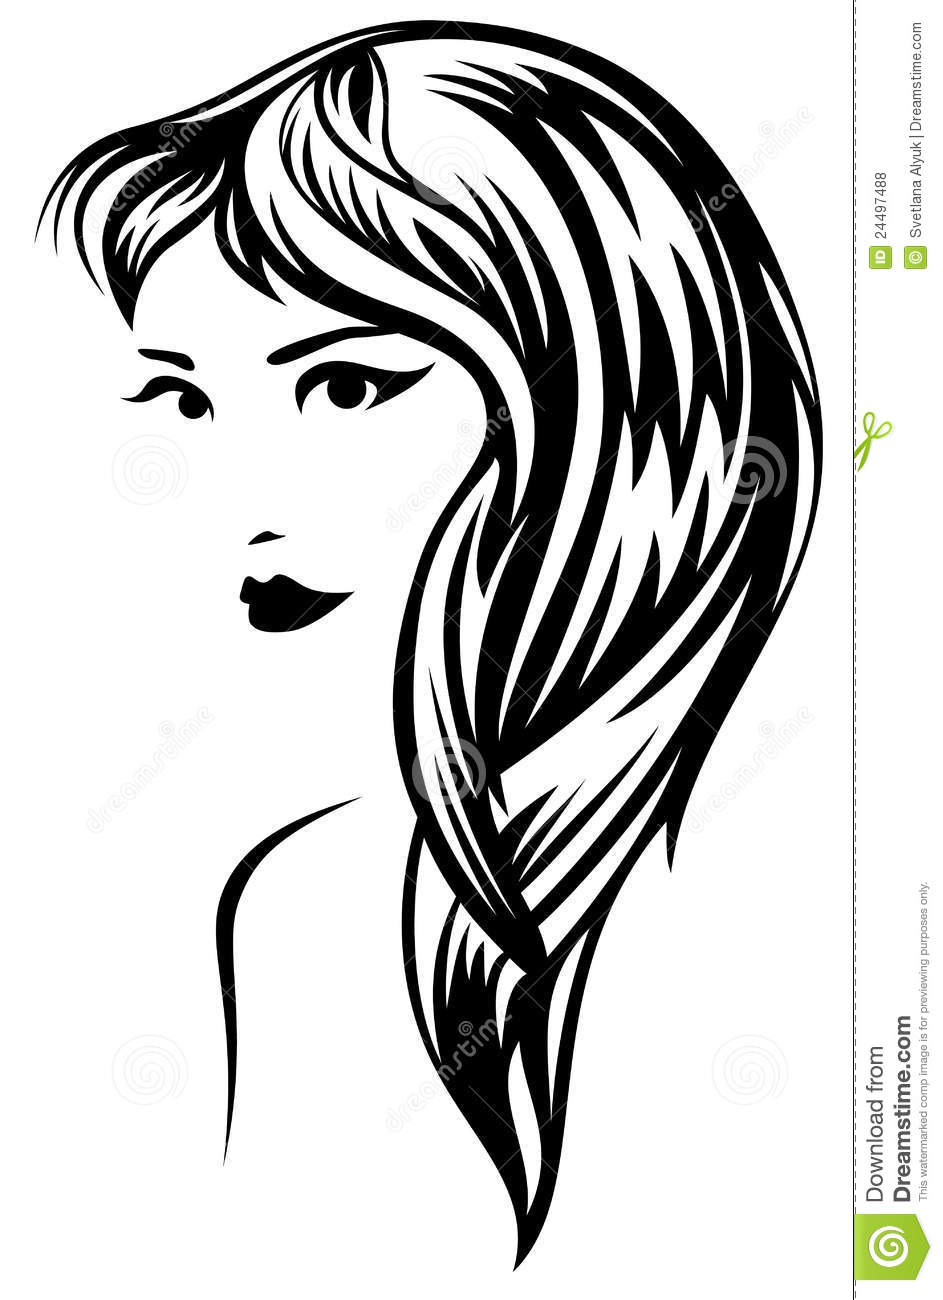 Girl with Black Hair and White Vector